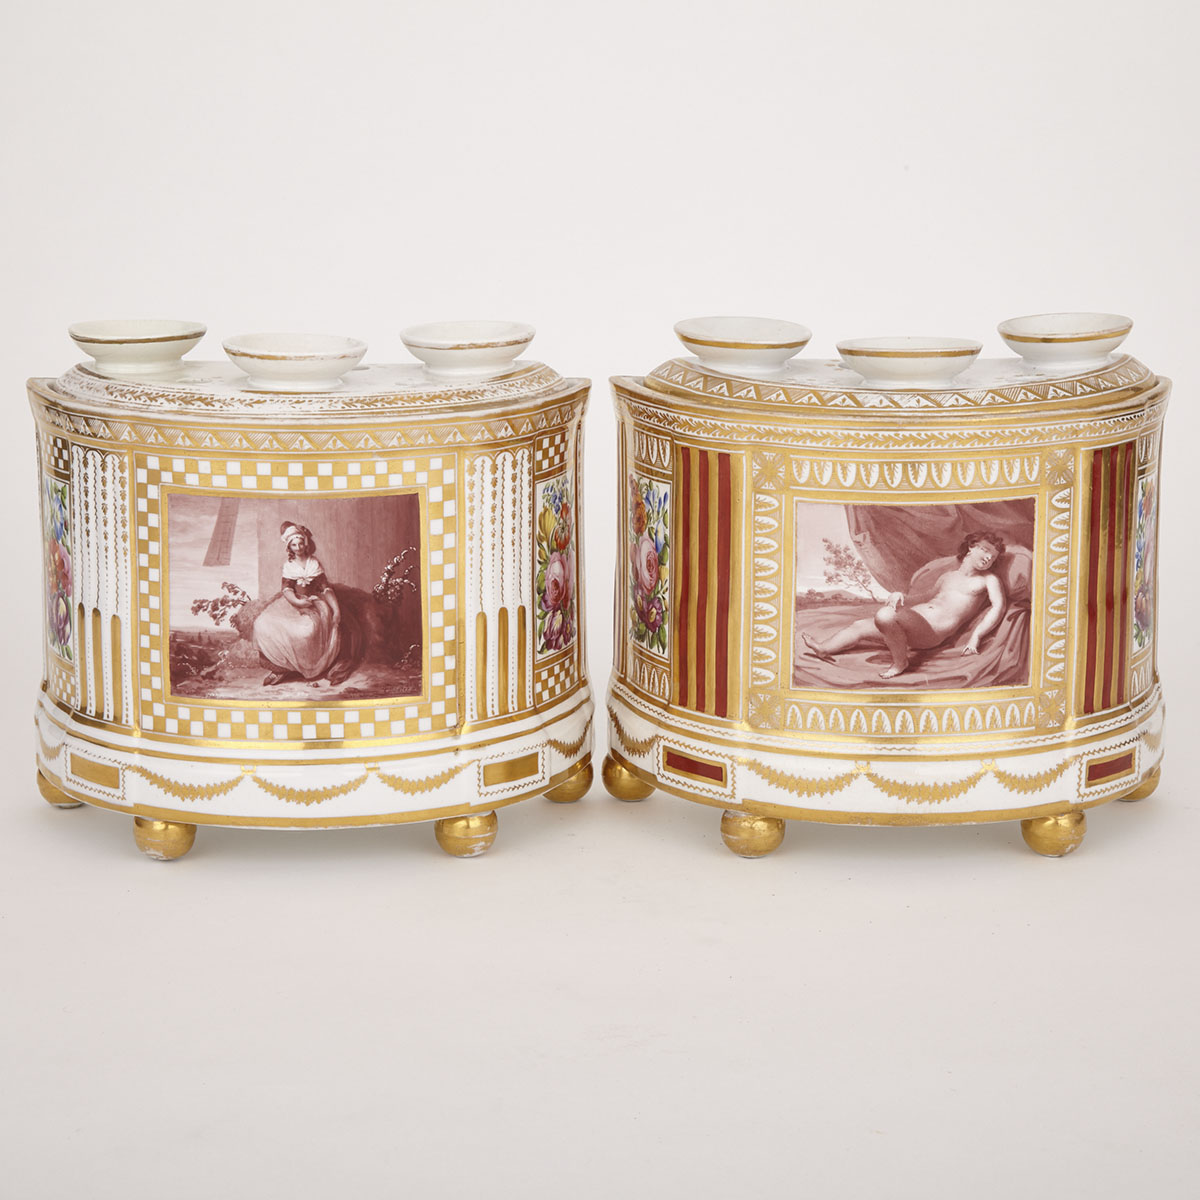 Assembled Pair of English Porcelain Bough Pots and Covers, probably Coalport, decorated by Thomas Baxter, dated 1801 and 1802